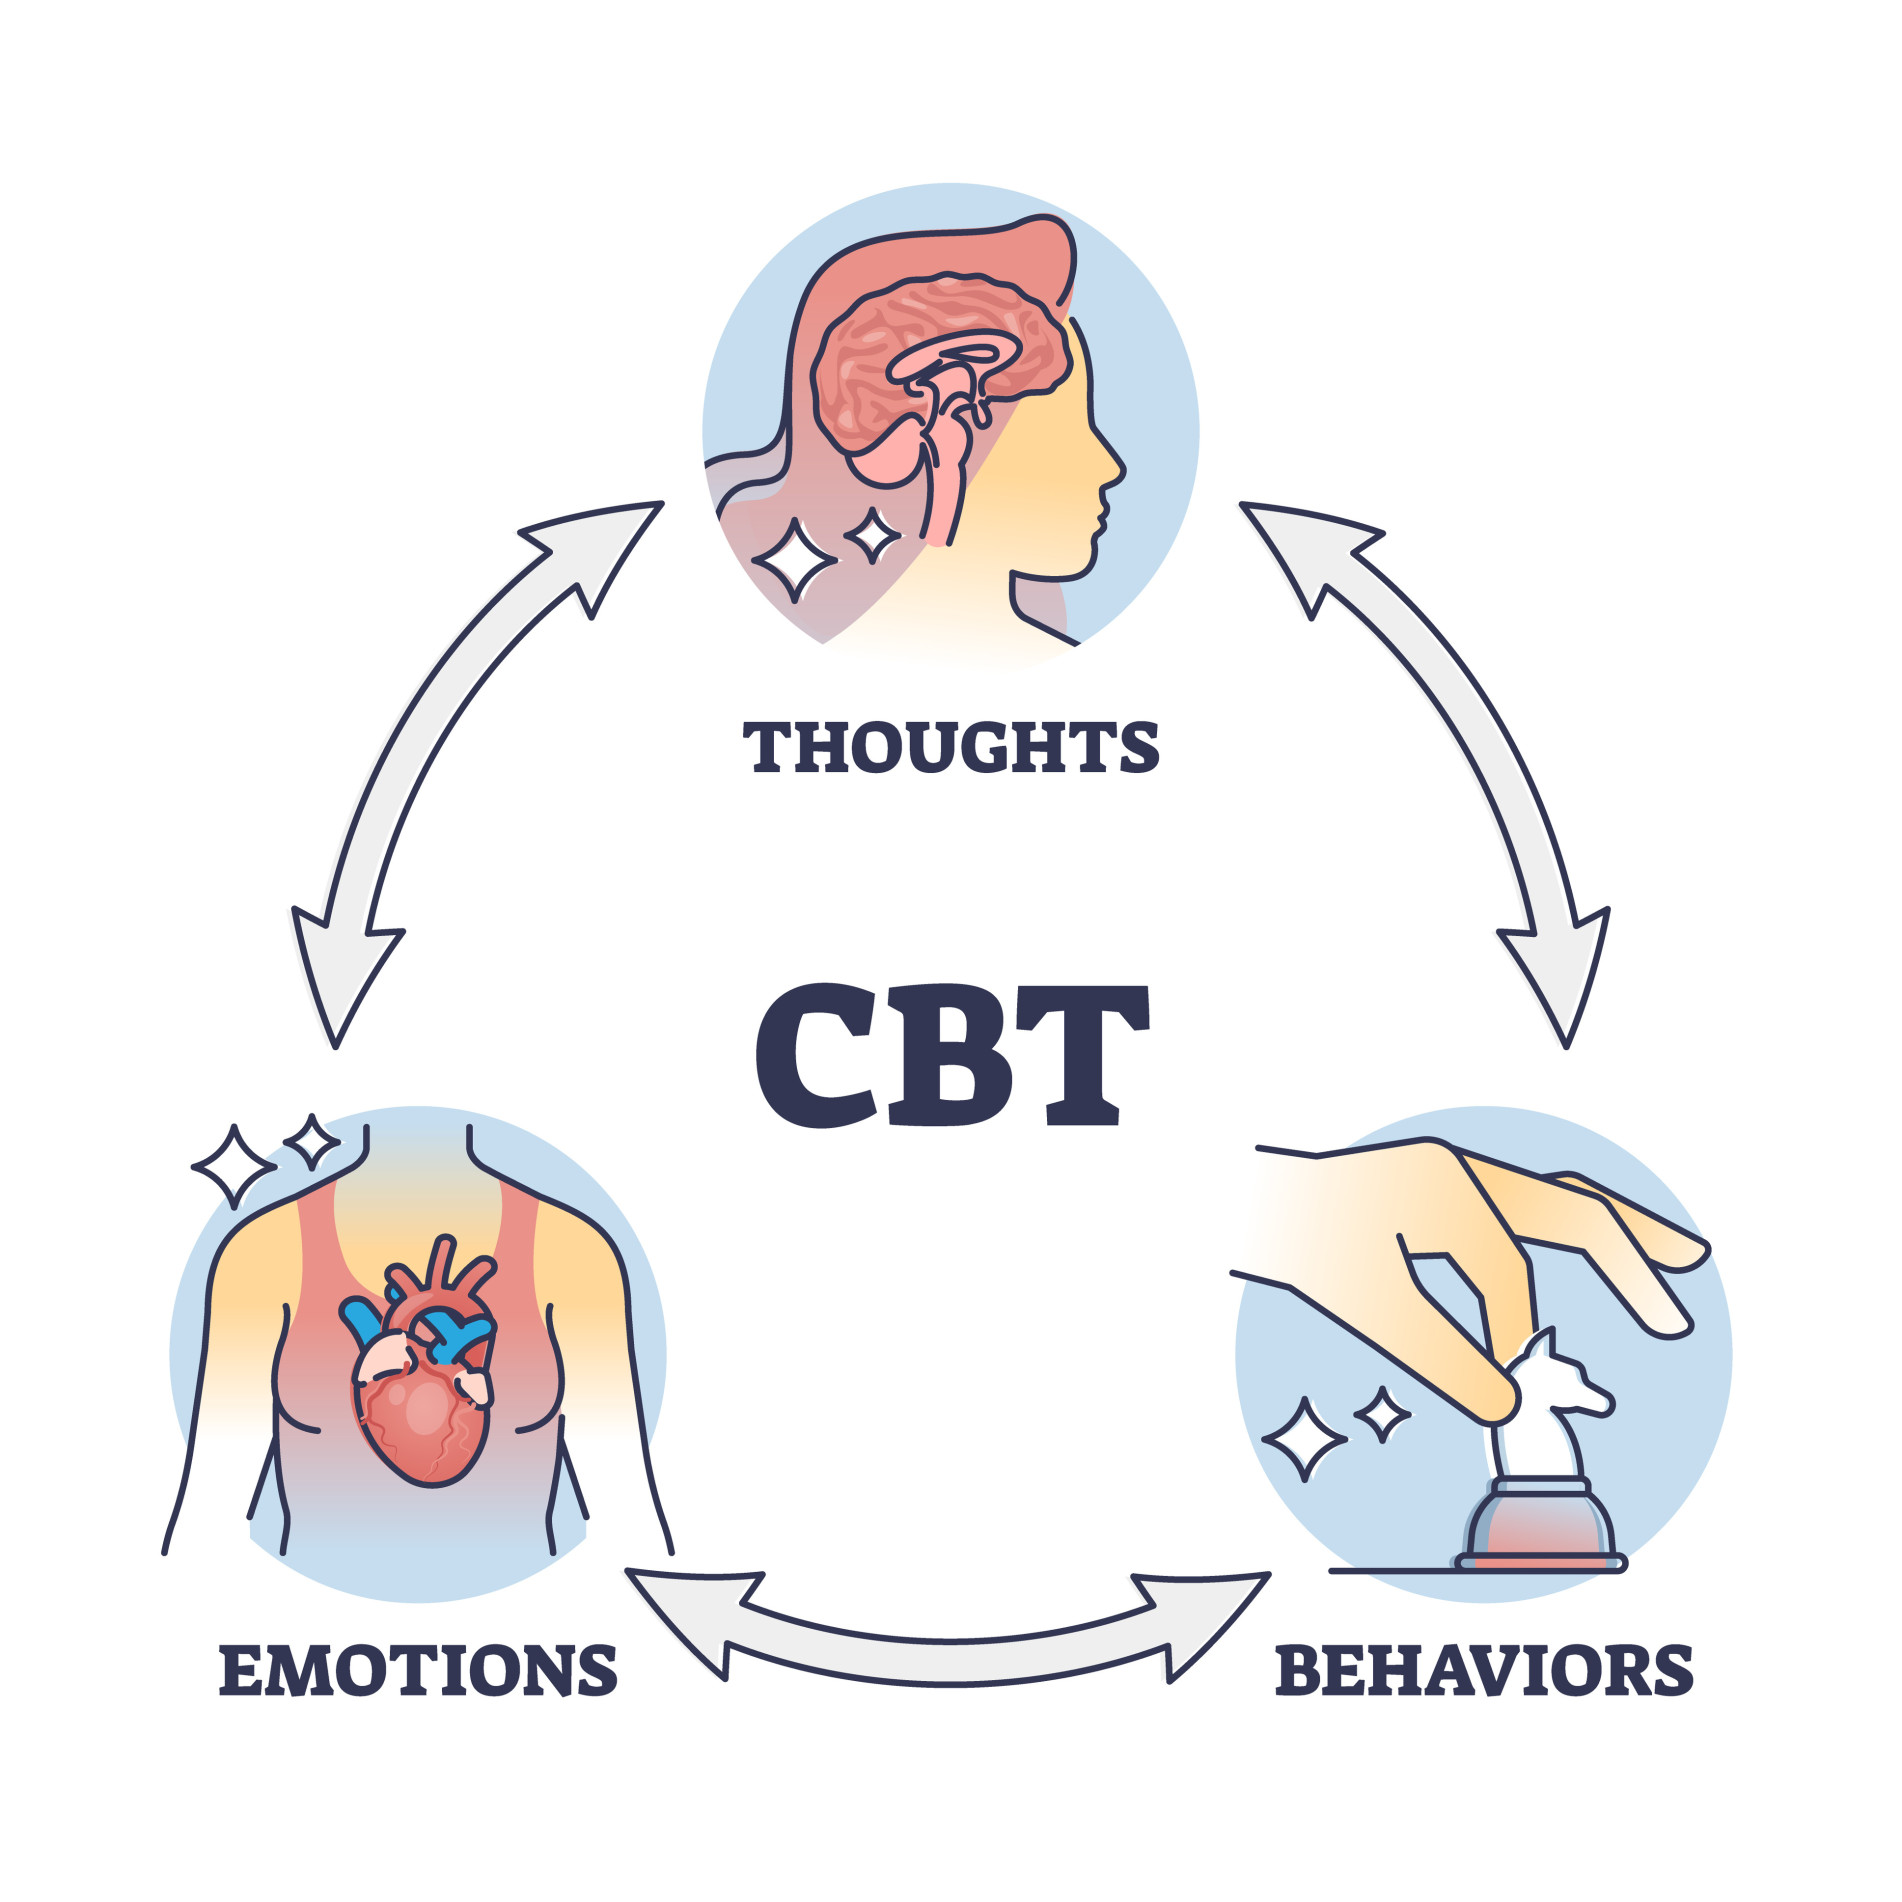 Cbt therapy